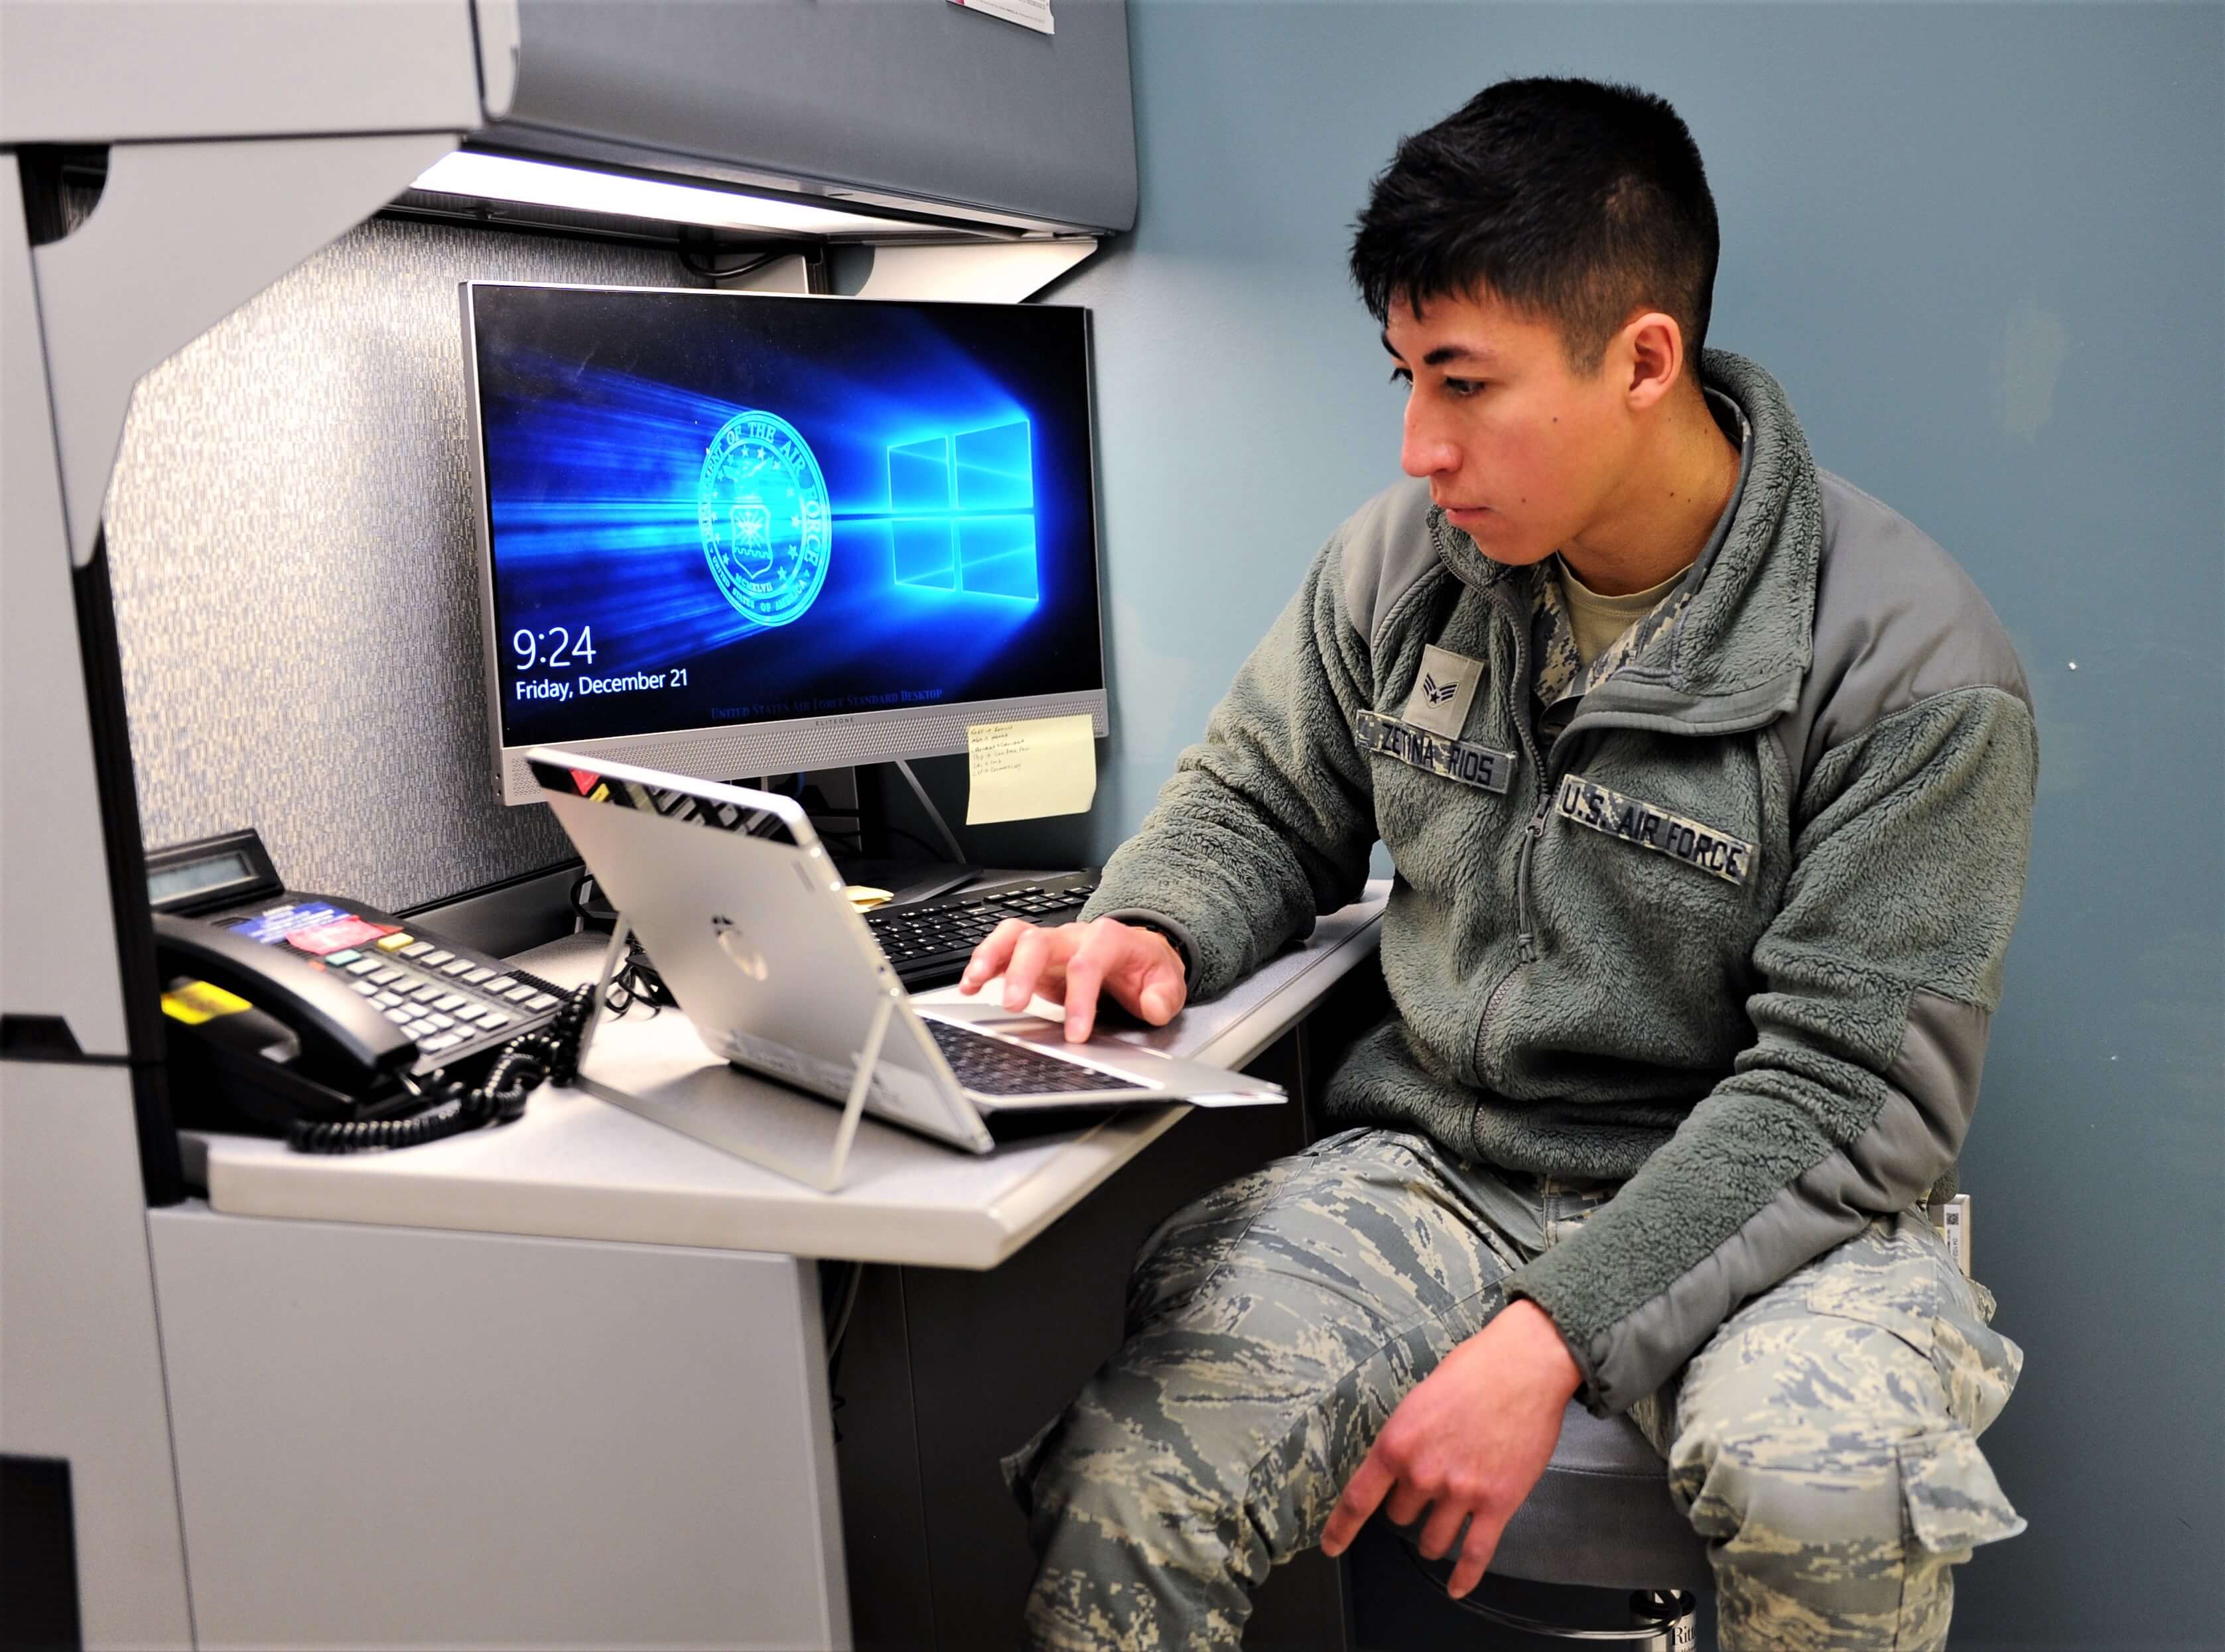 10th Medical Group At Air Force Academy Enhances Patient Care With